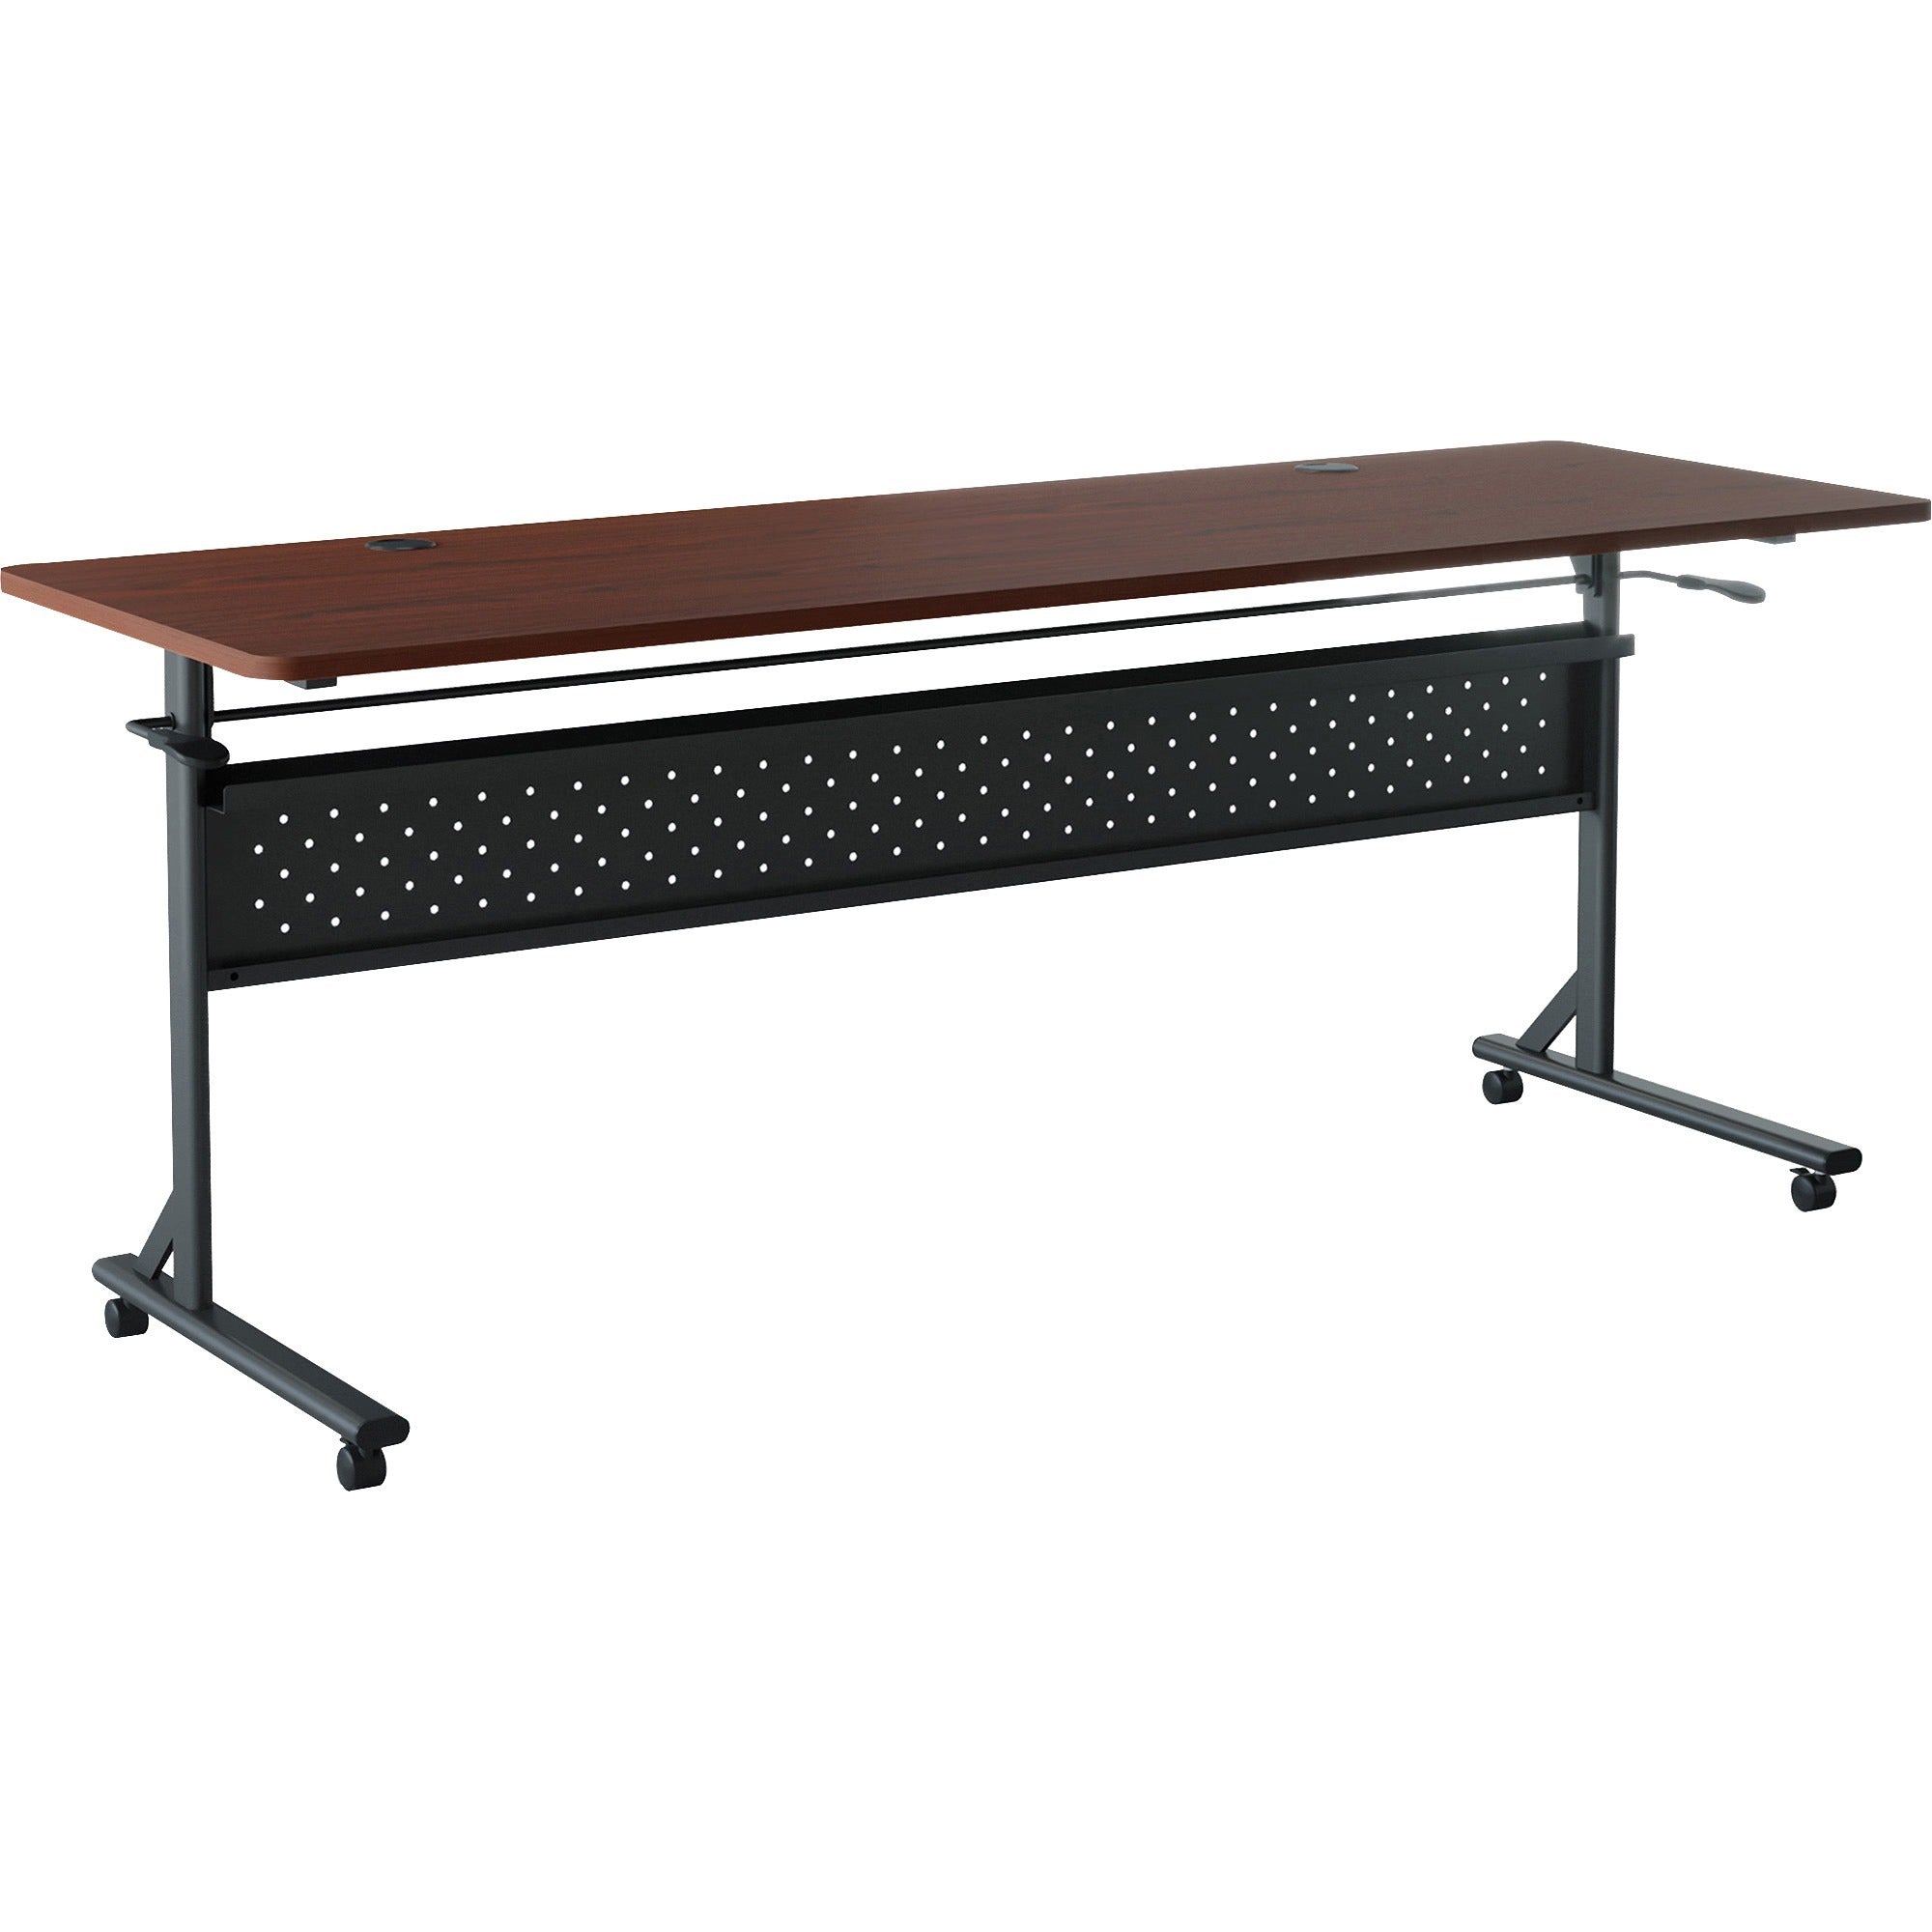 lorell-shift-20-flip-and-nesting-mobile-table-for-table-toplaminated-rectangle-top-72-table-top-length-x-24-table-top-width-x-1-table-top-thickness-2950-height-assembly-required-mahogany-1-each_llr60761 - 1